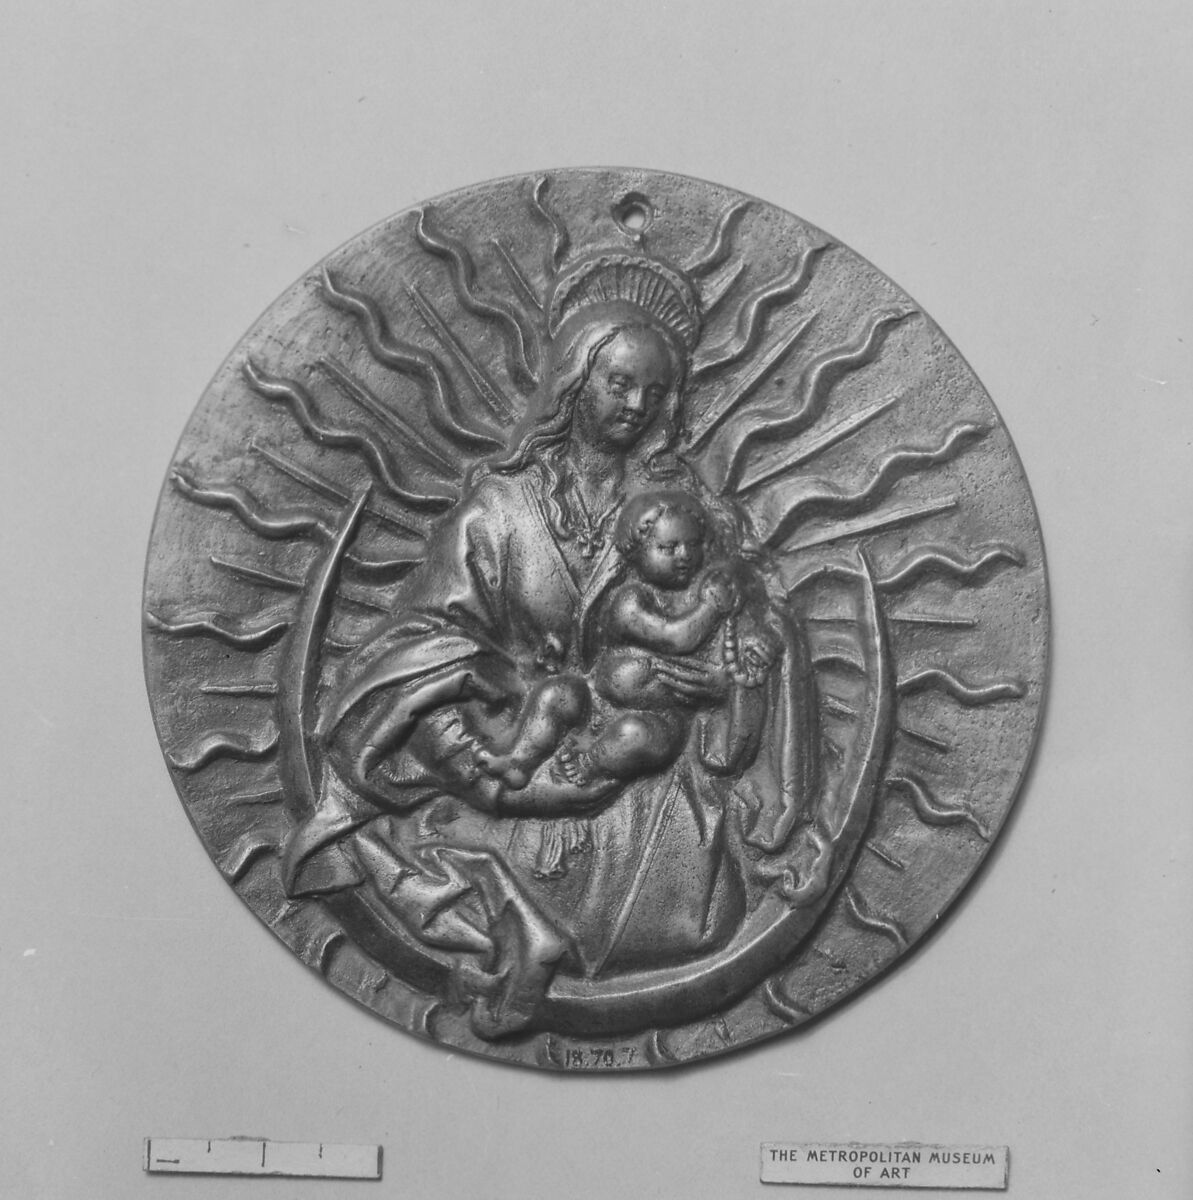 Virgin and Child, Bell metal, German, possibly Augsburg 